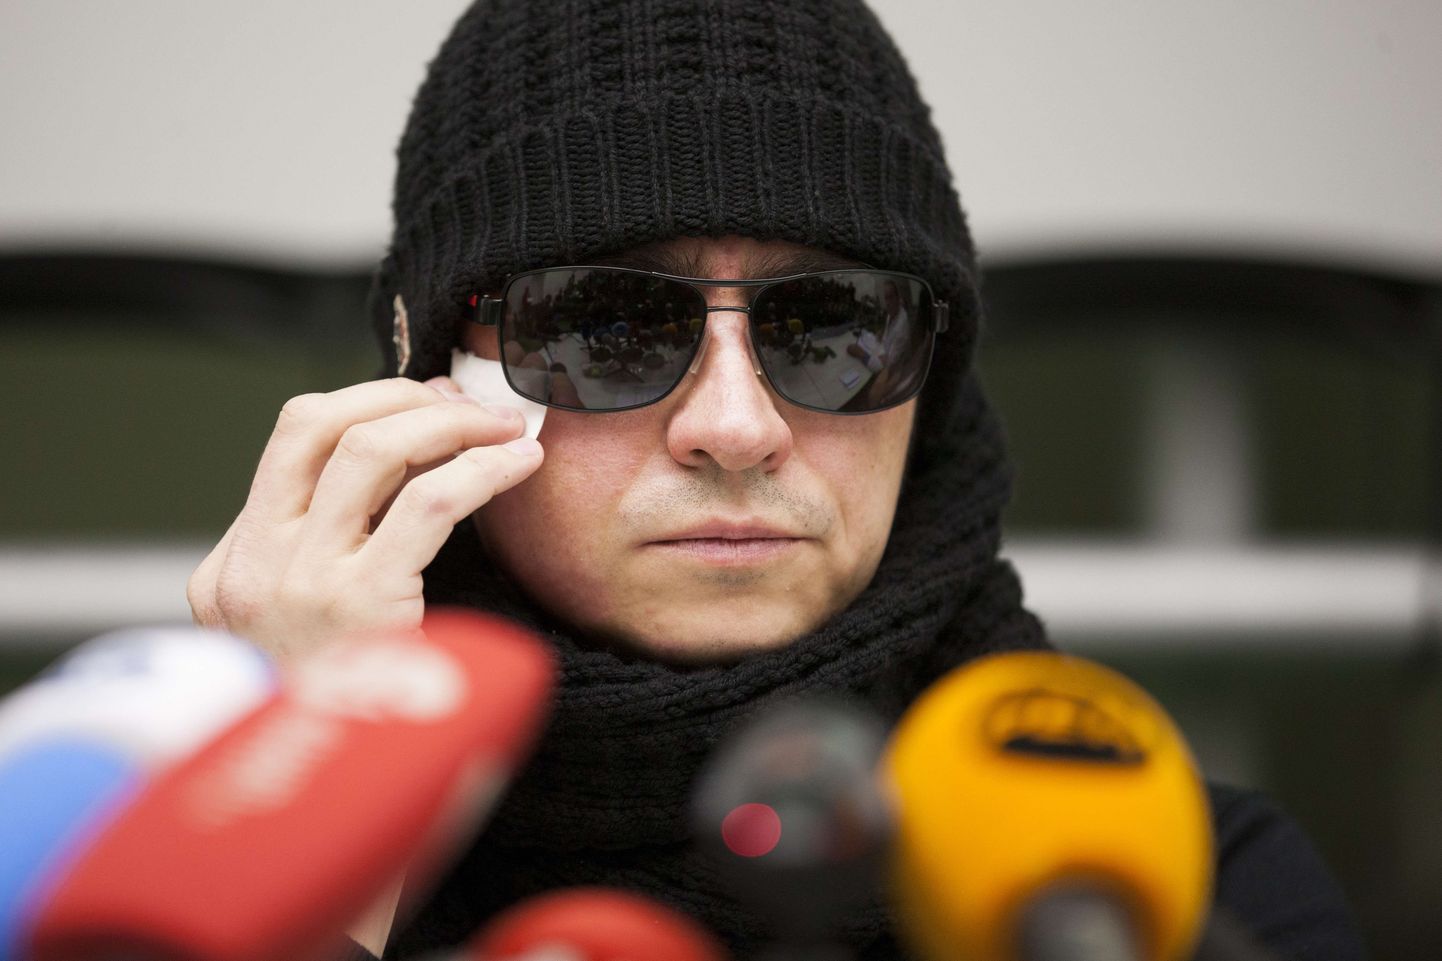 Sergei Filins, the Bolshoi ballet's chief, wears sunglasses and a cap as he attends a press conference at the University Hospital of Aachen on March 15, 2013 in Aachen, western Germany, where he is being treated after an acid attack.
Bolshoi artistic director Sergei Filin, who suffered serious eye damage and facial disfigurement in a horrific acid attack, will be able to recover enough vision to return to work, a German doctor treating him said Friday, March 15, 2013. AFP PHOTO /ROLF VENNENBERND  GERMANY OUT